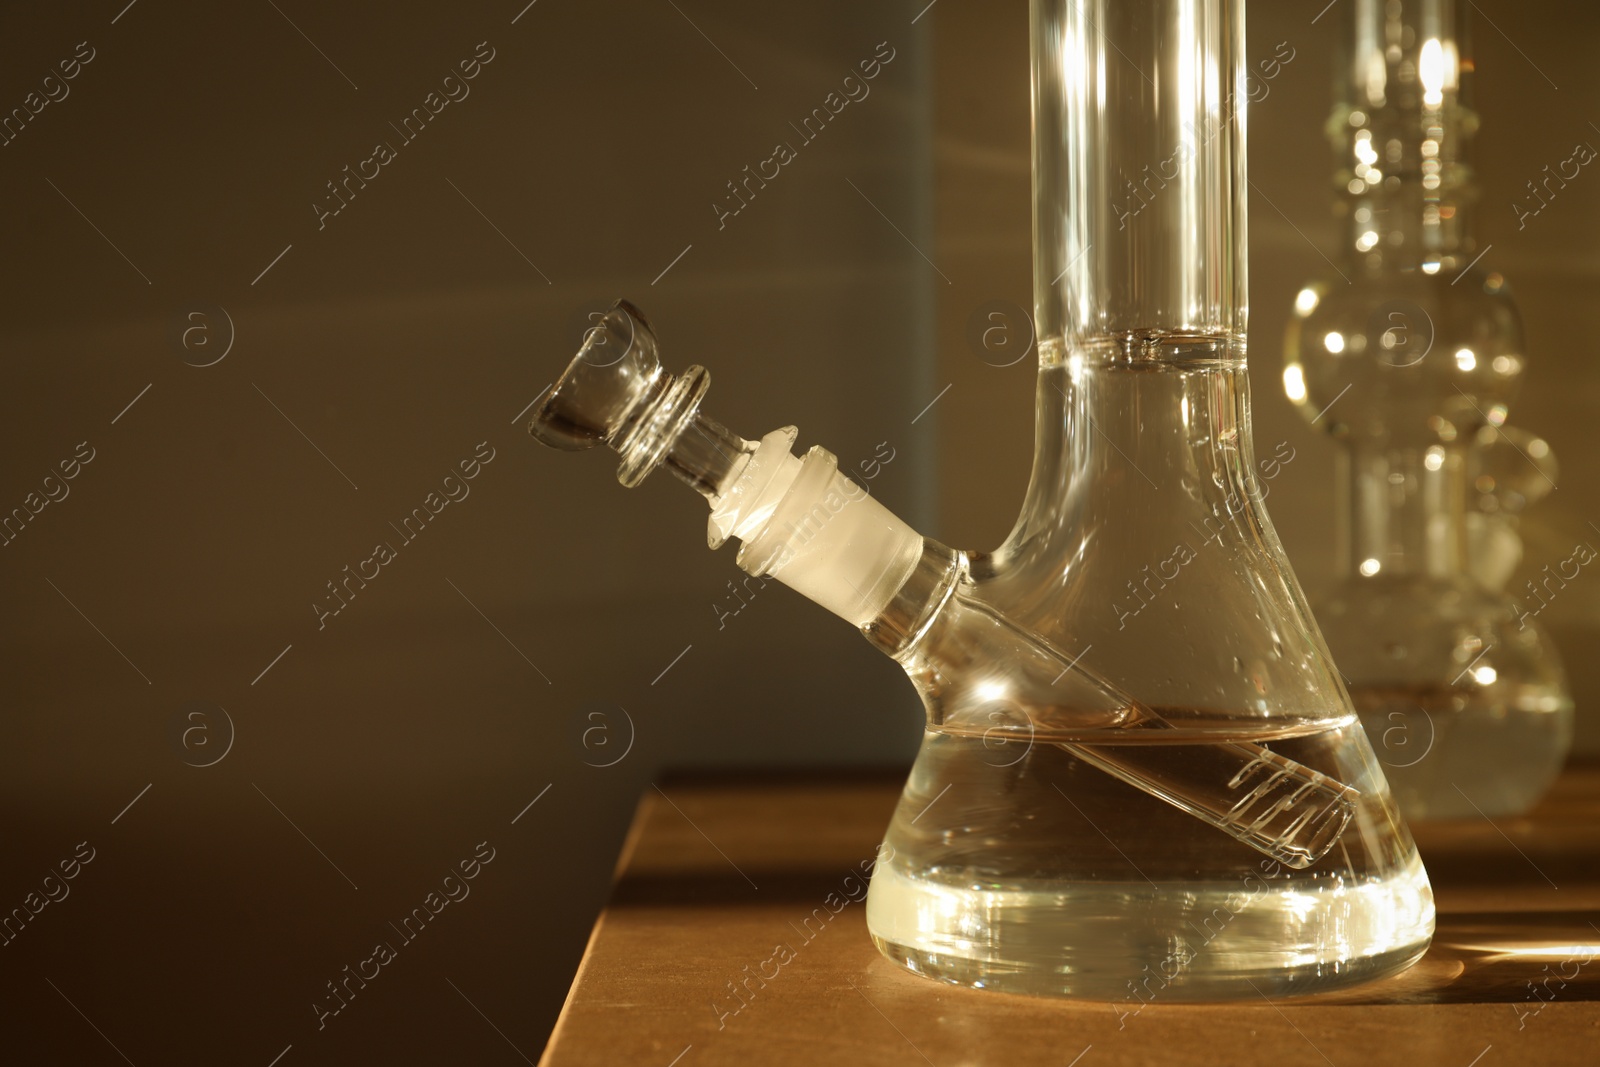 Photo of Closeup view of glass bong on wooden table indoors. Smoking device